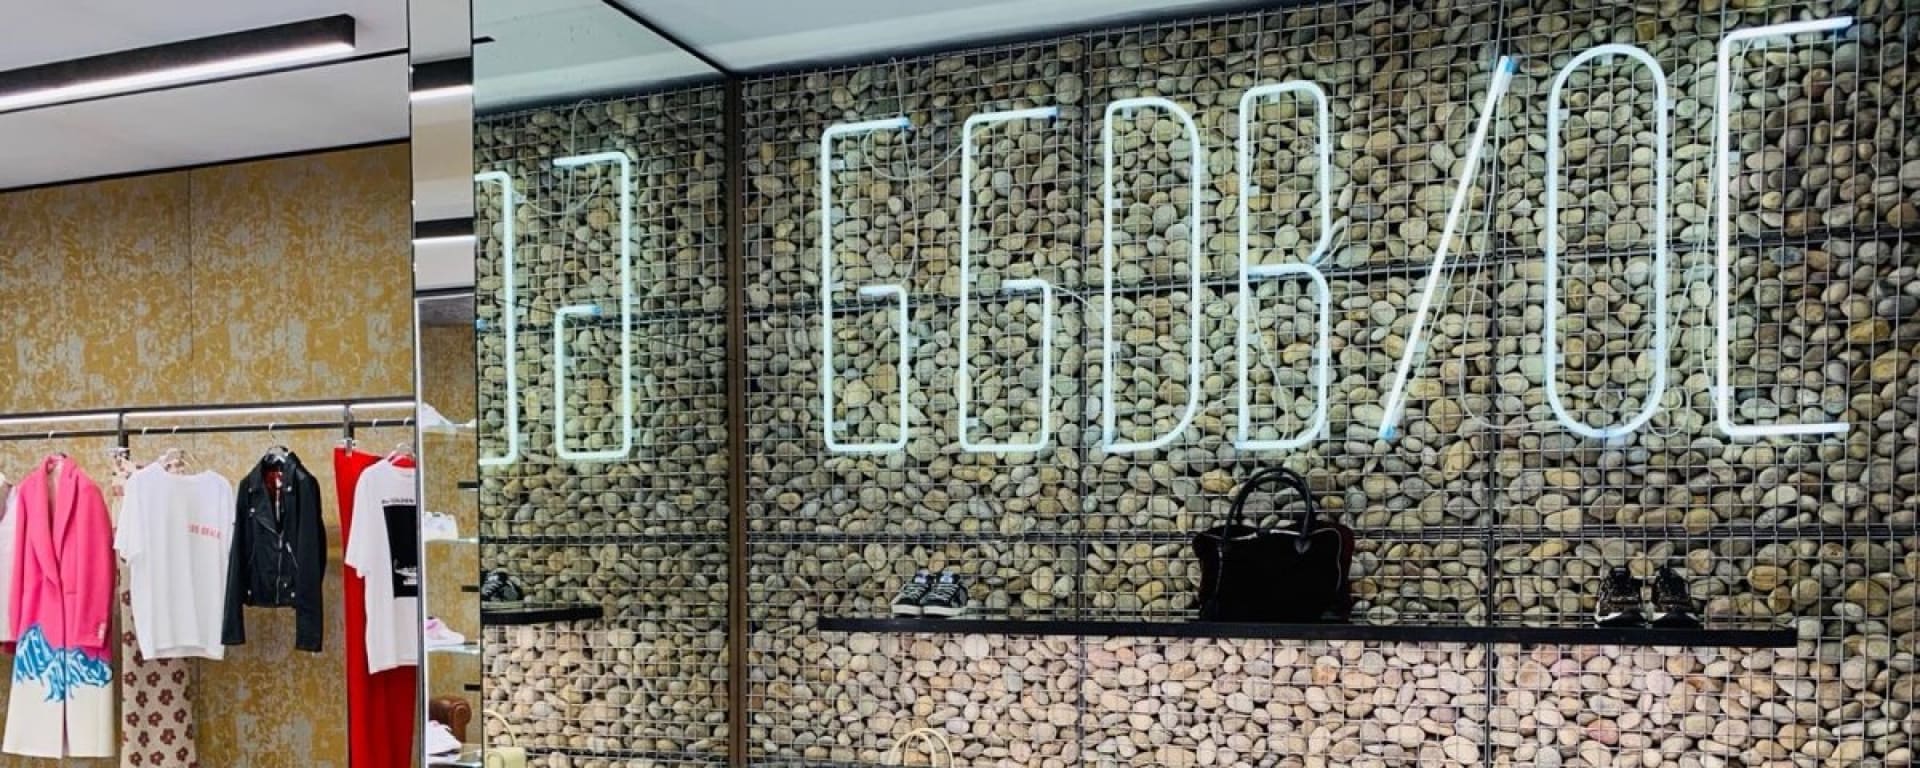 Golden Goose LOS ANGELES FLAGSHIP STORE - COSTA MESA 1 of 1